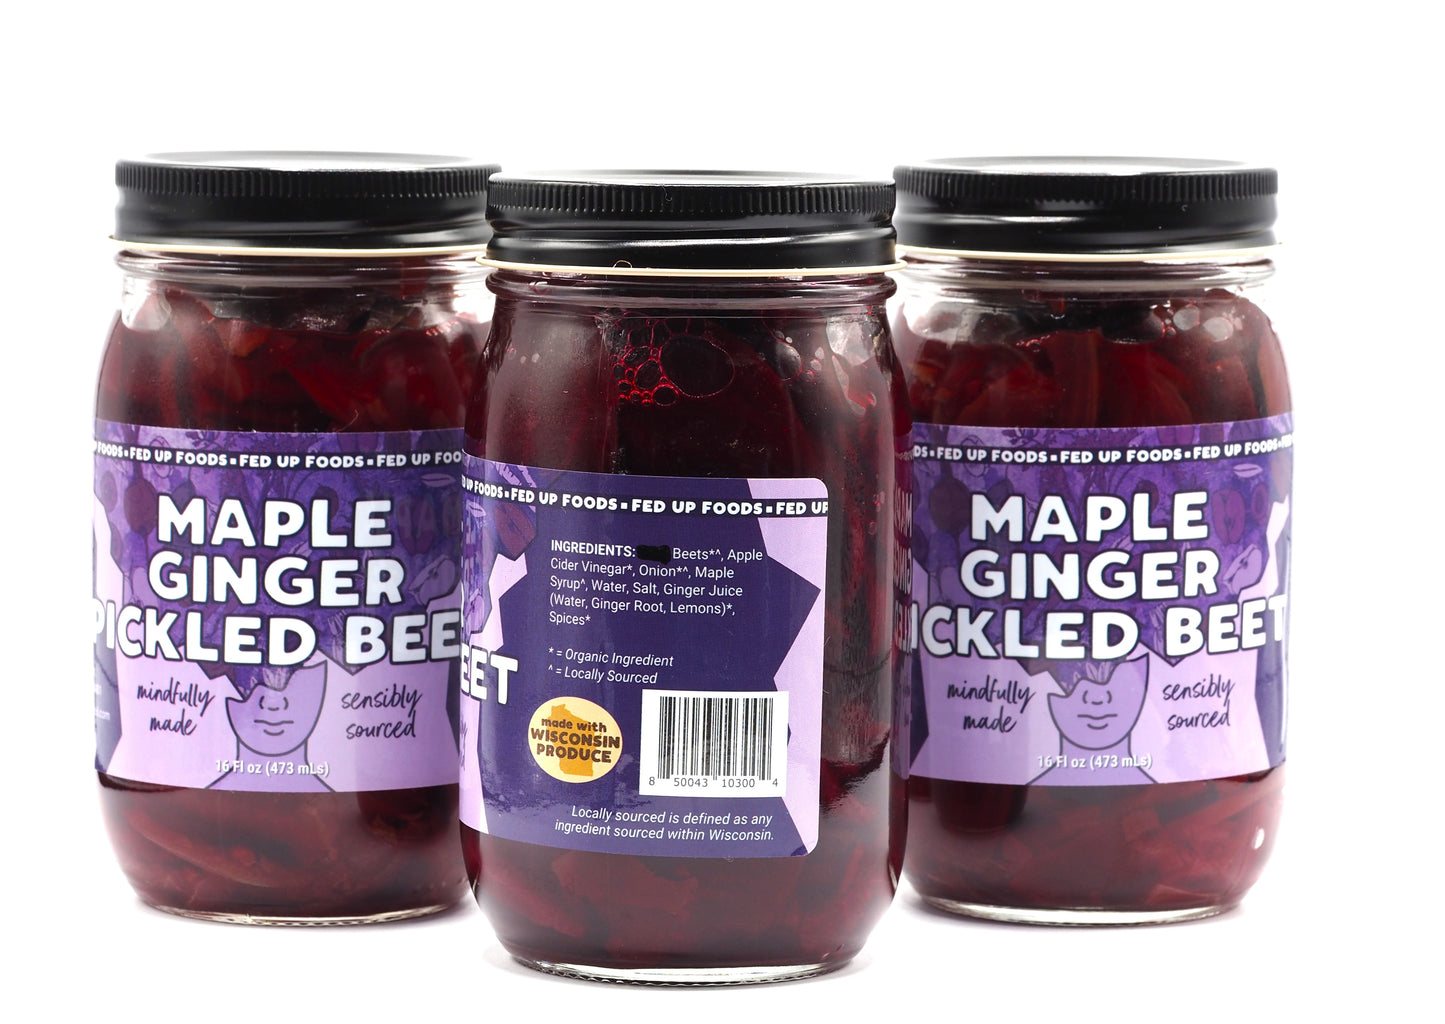 Fed Up Foods Maple Ginger Pickled Beet in a 3 pack. Wisconsin organic beets 